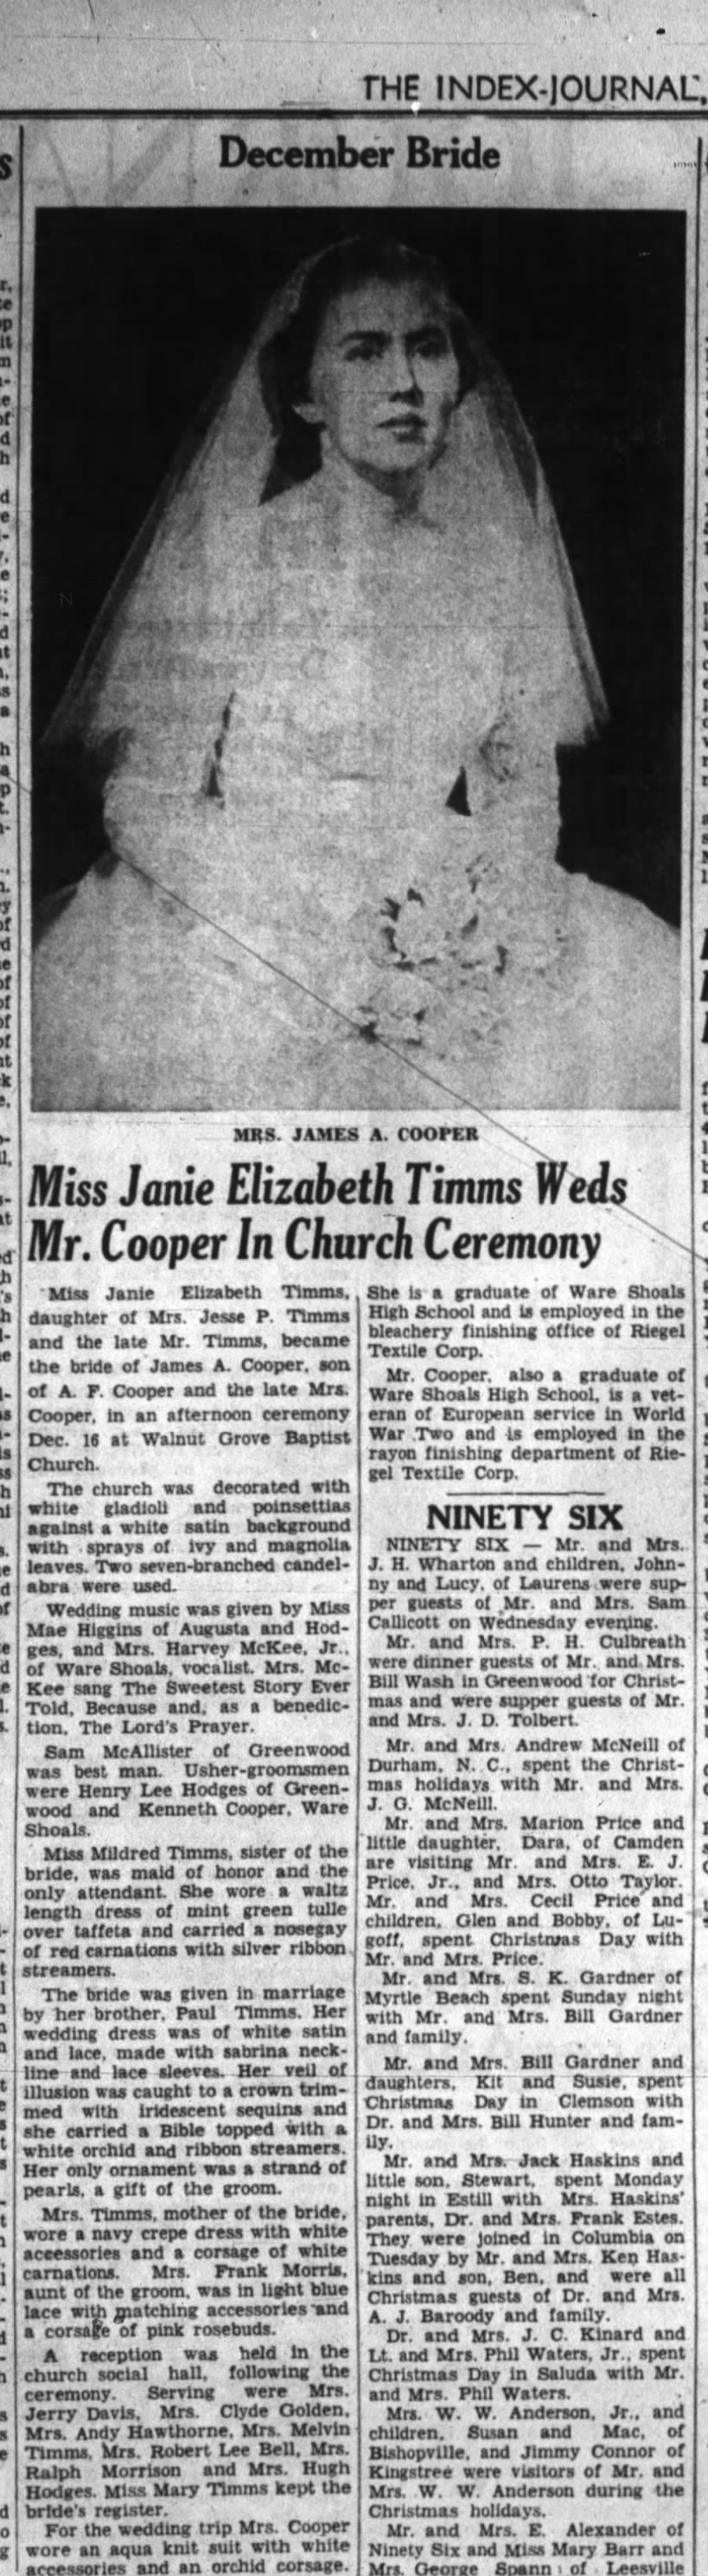 TIMMS - Janie Elizabeth Timms weds James A. Cooper